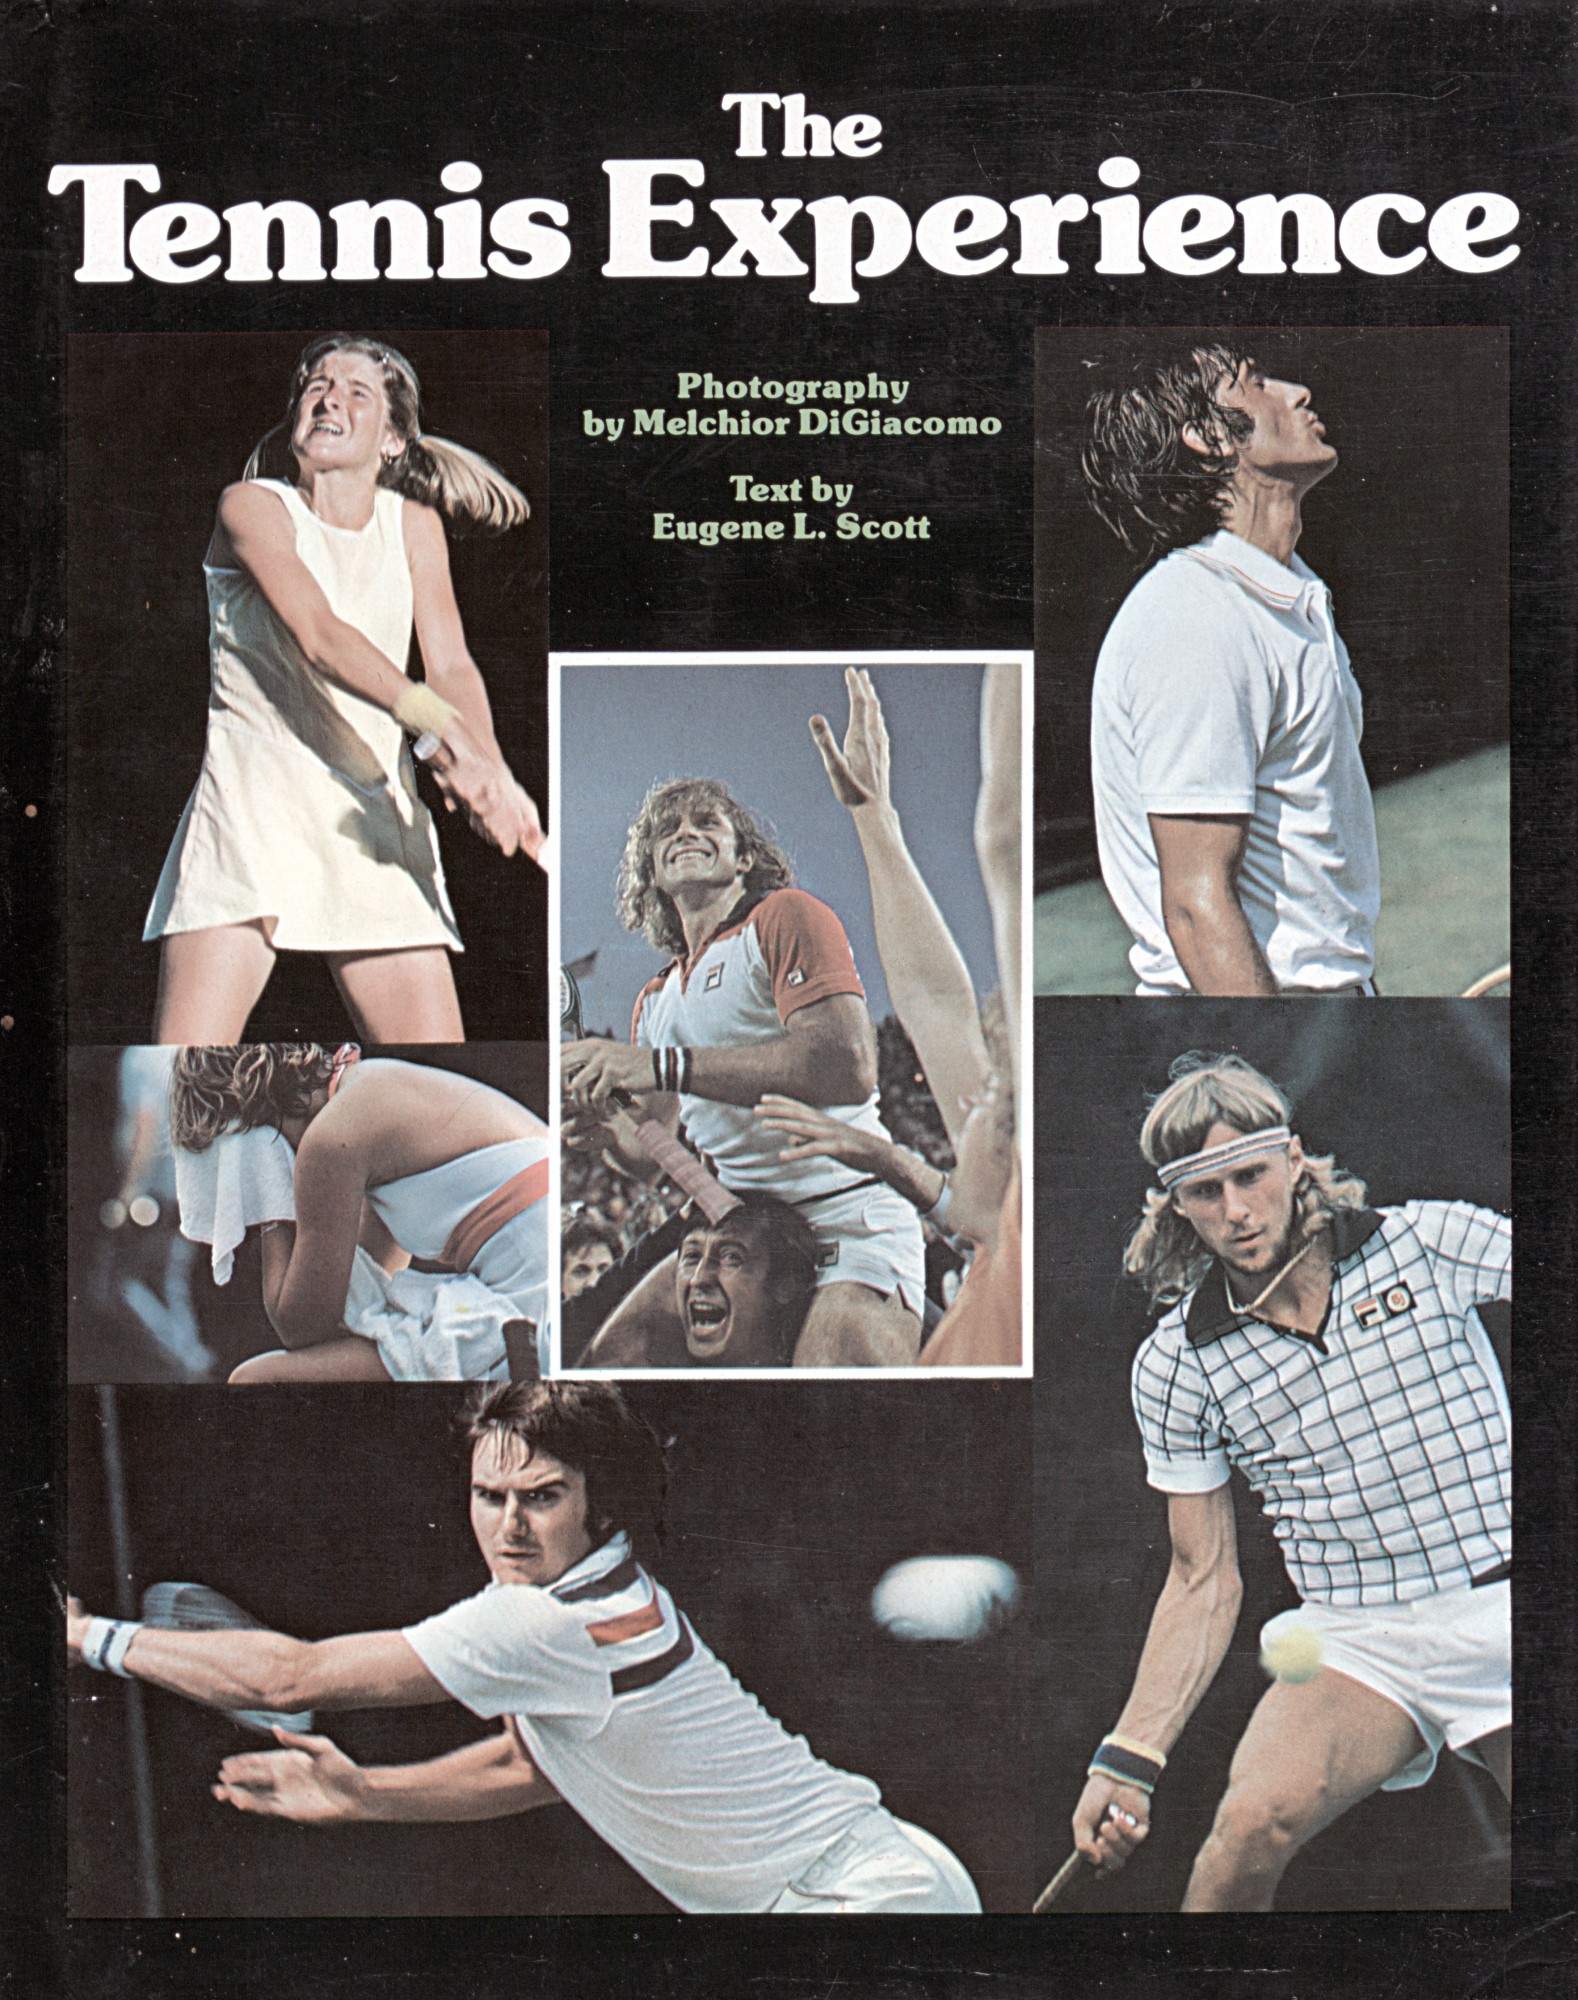 The Tennis Experience